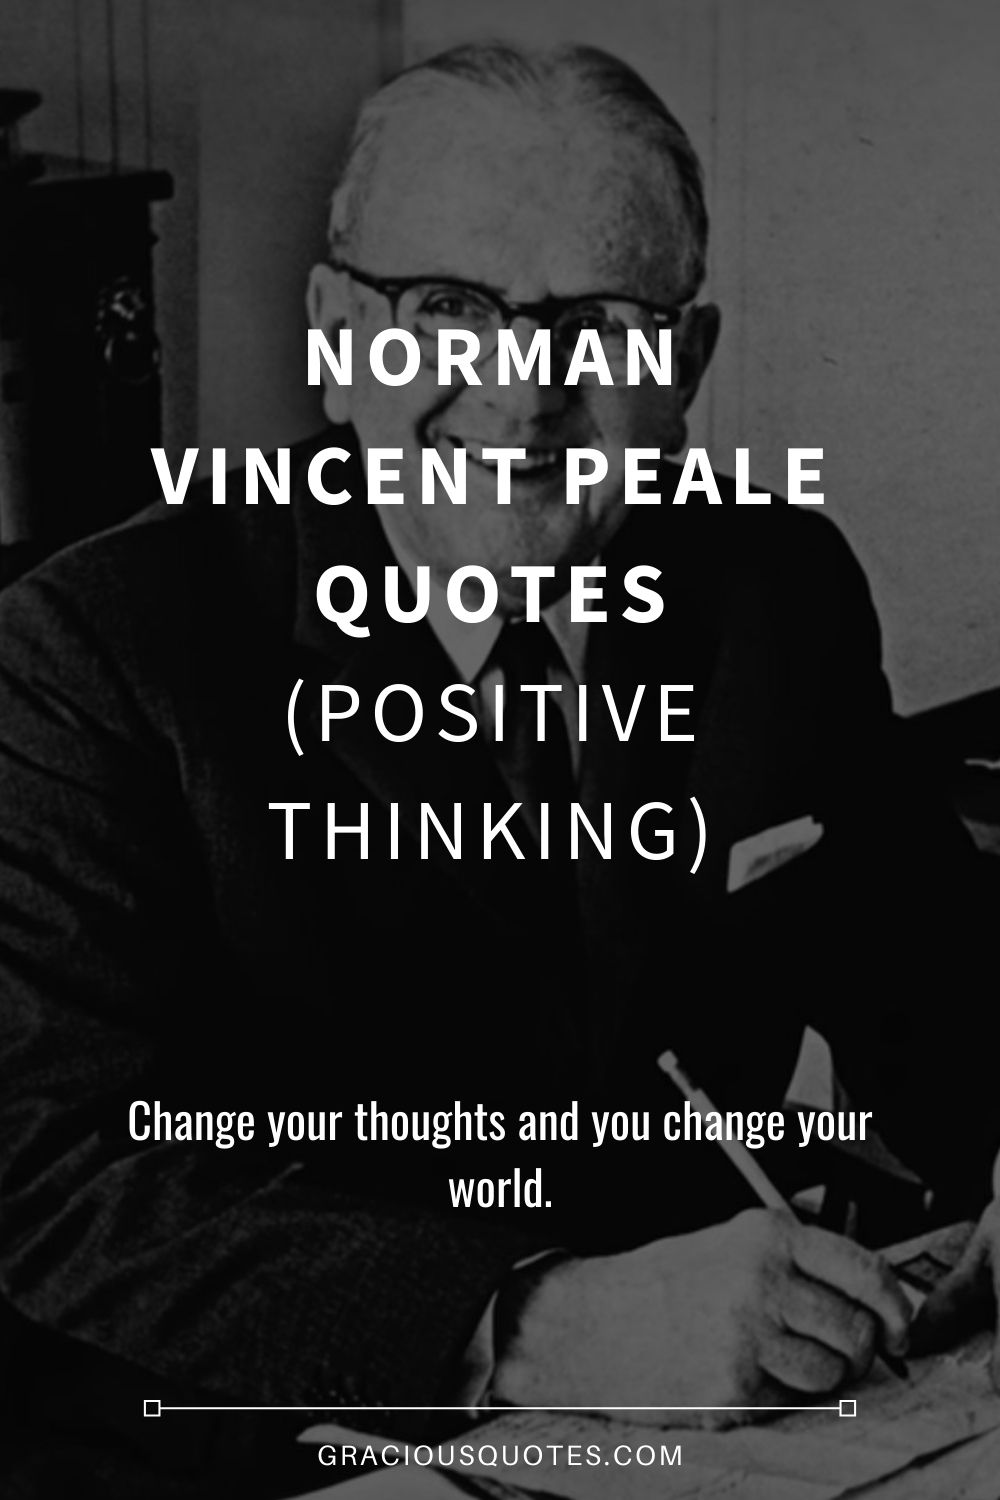 Norman Vincent Peale Quotes (POSITIVE THINKING) - Gracious Quotes